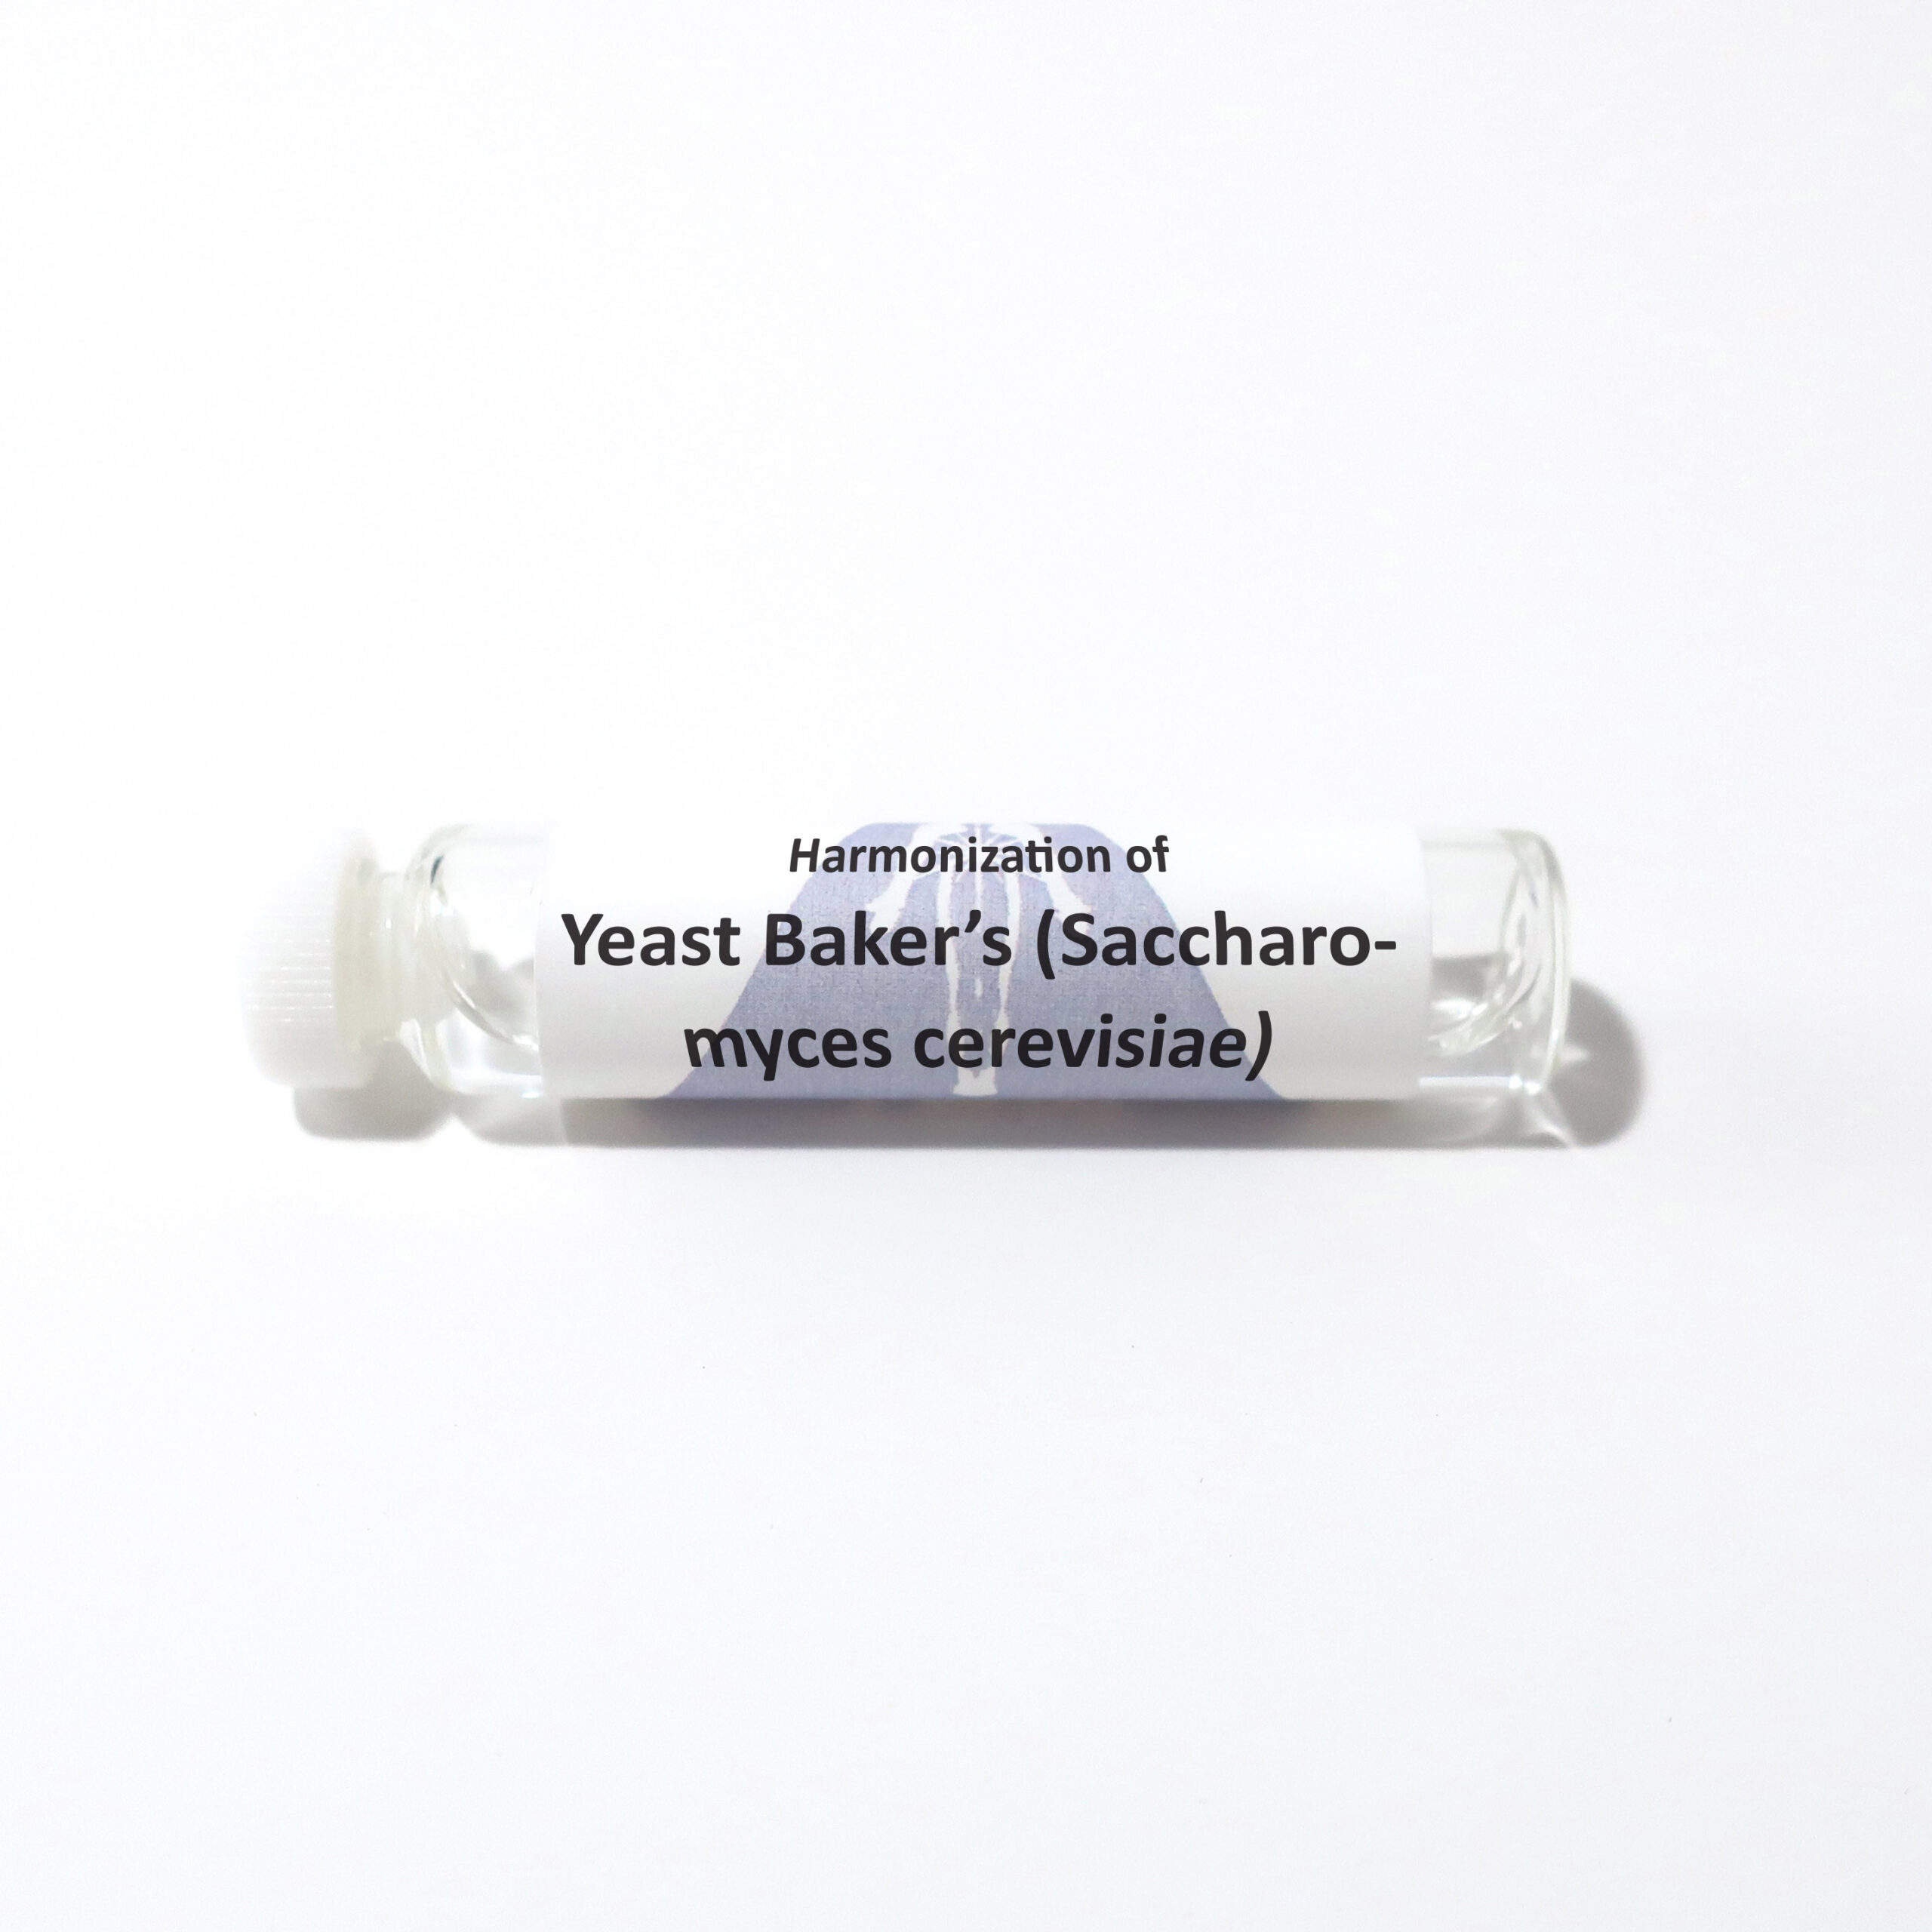 Yeast, Baker's (Saccharomyces cerevisiae)